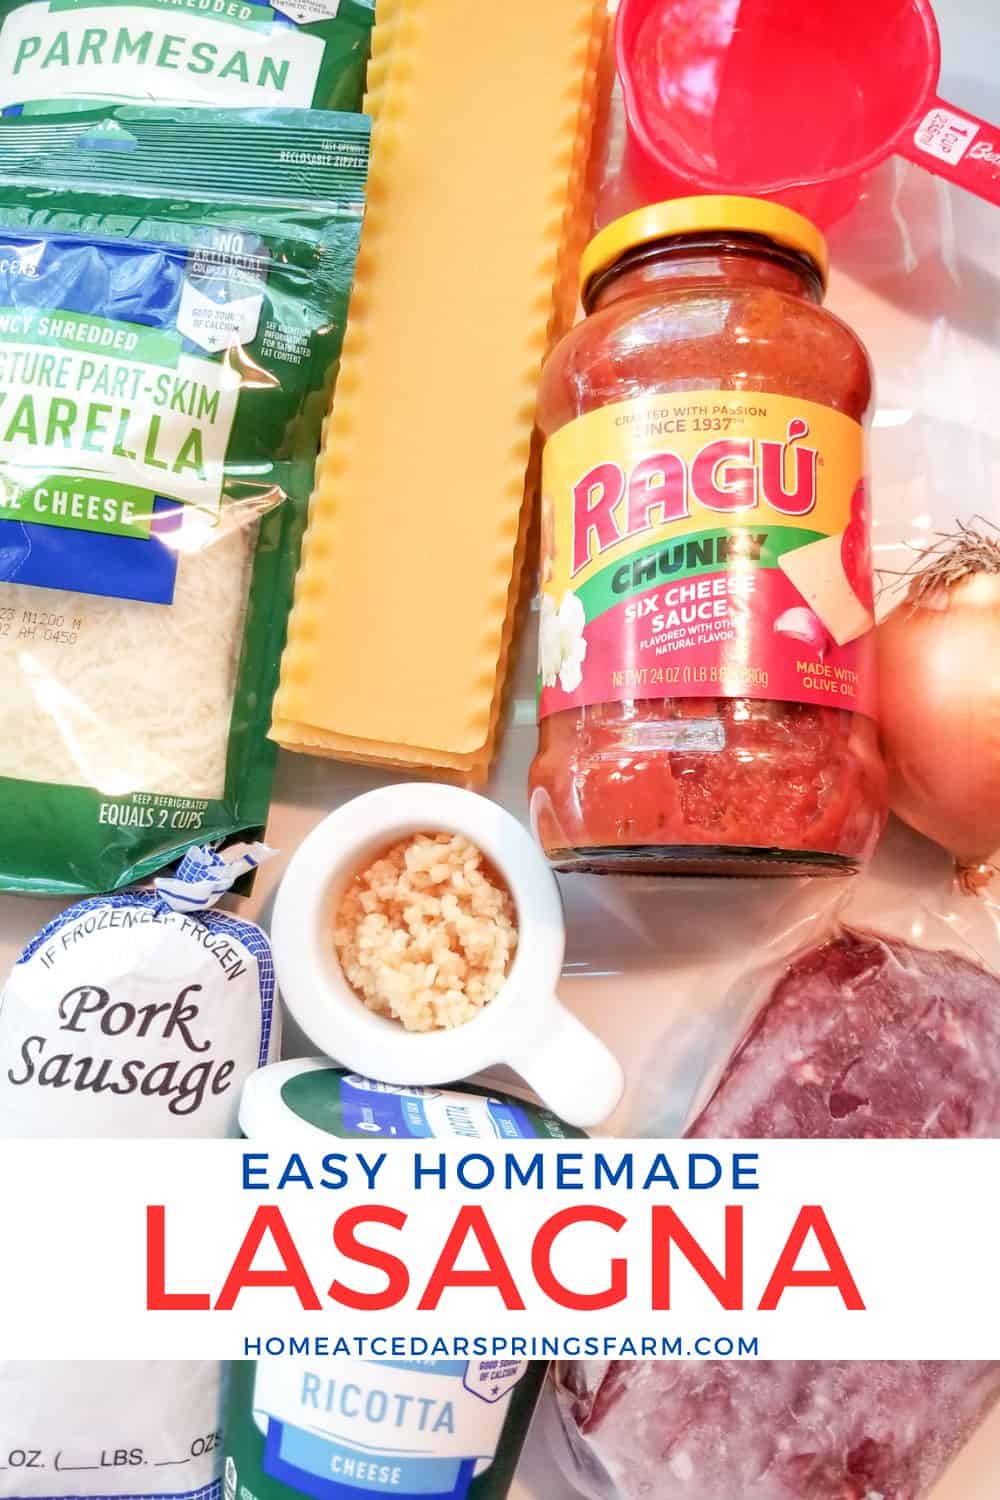 Ingredients needed for making homemade lasagna with text overlay.